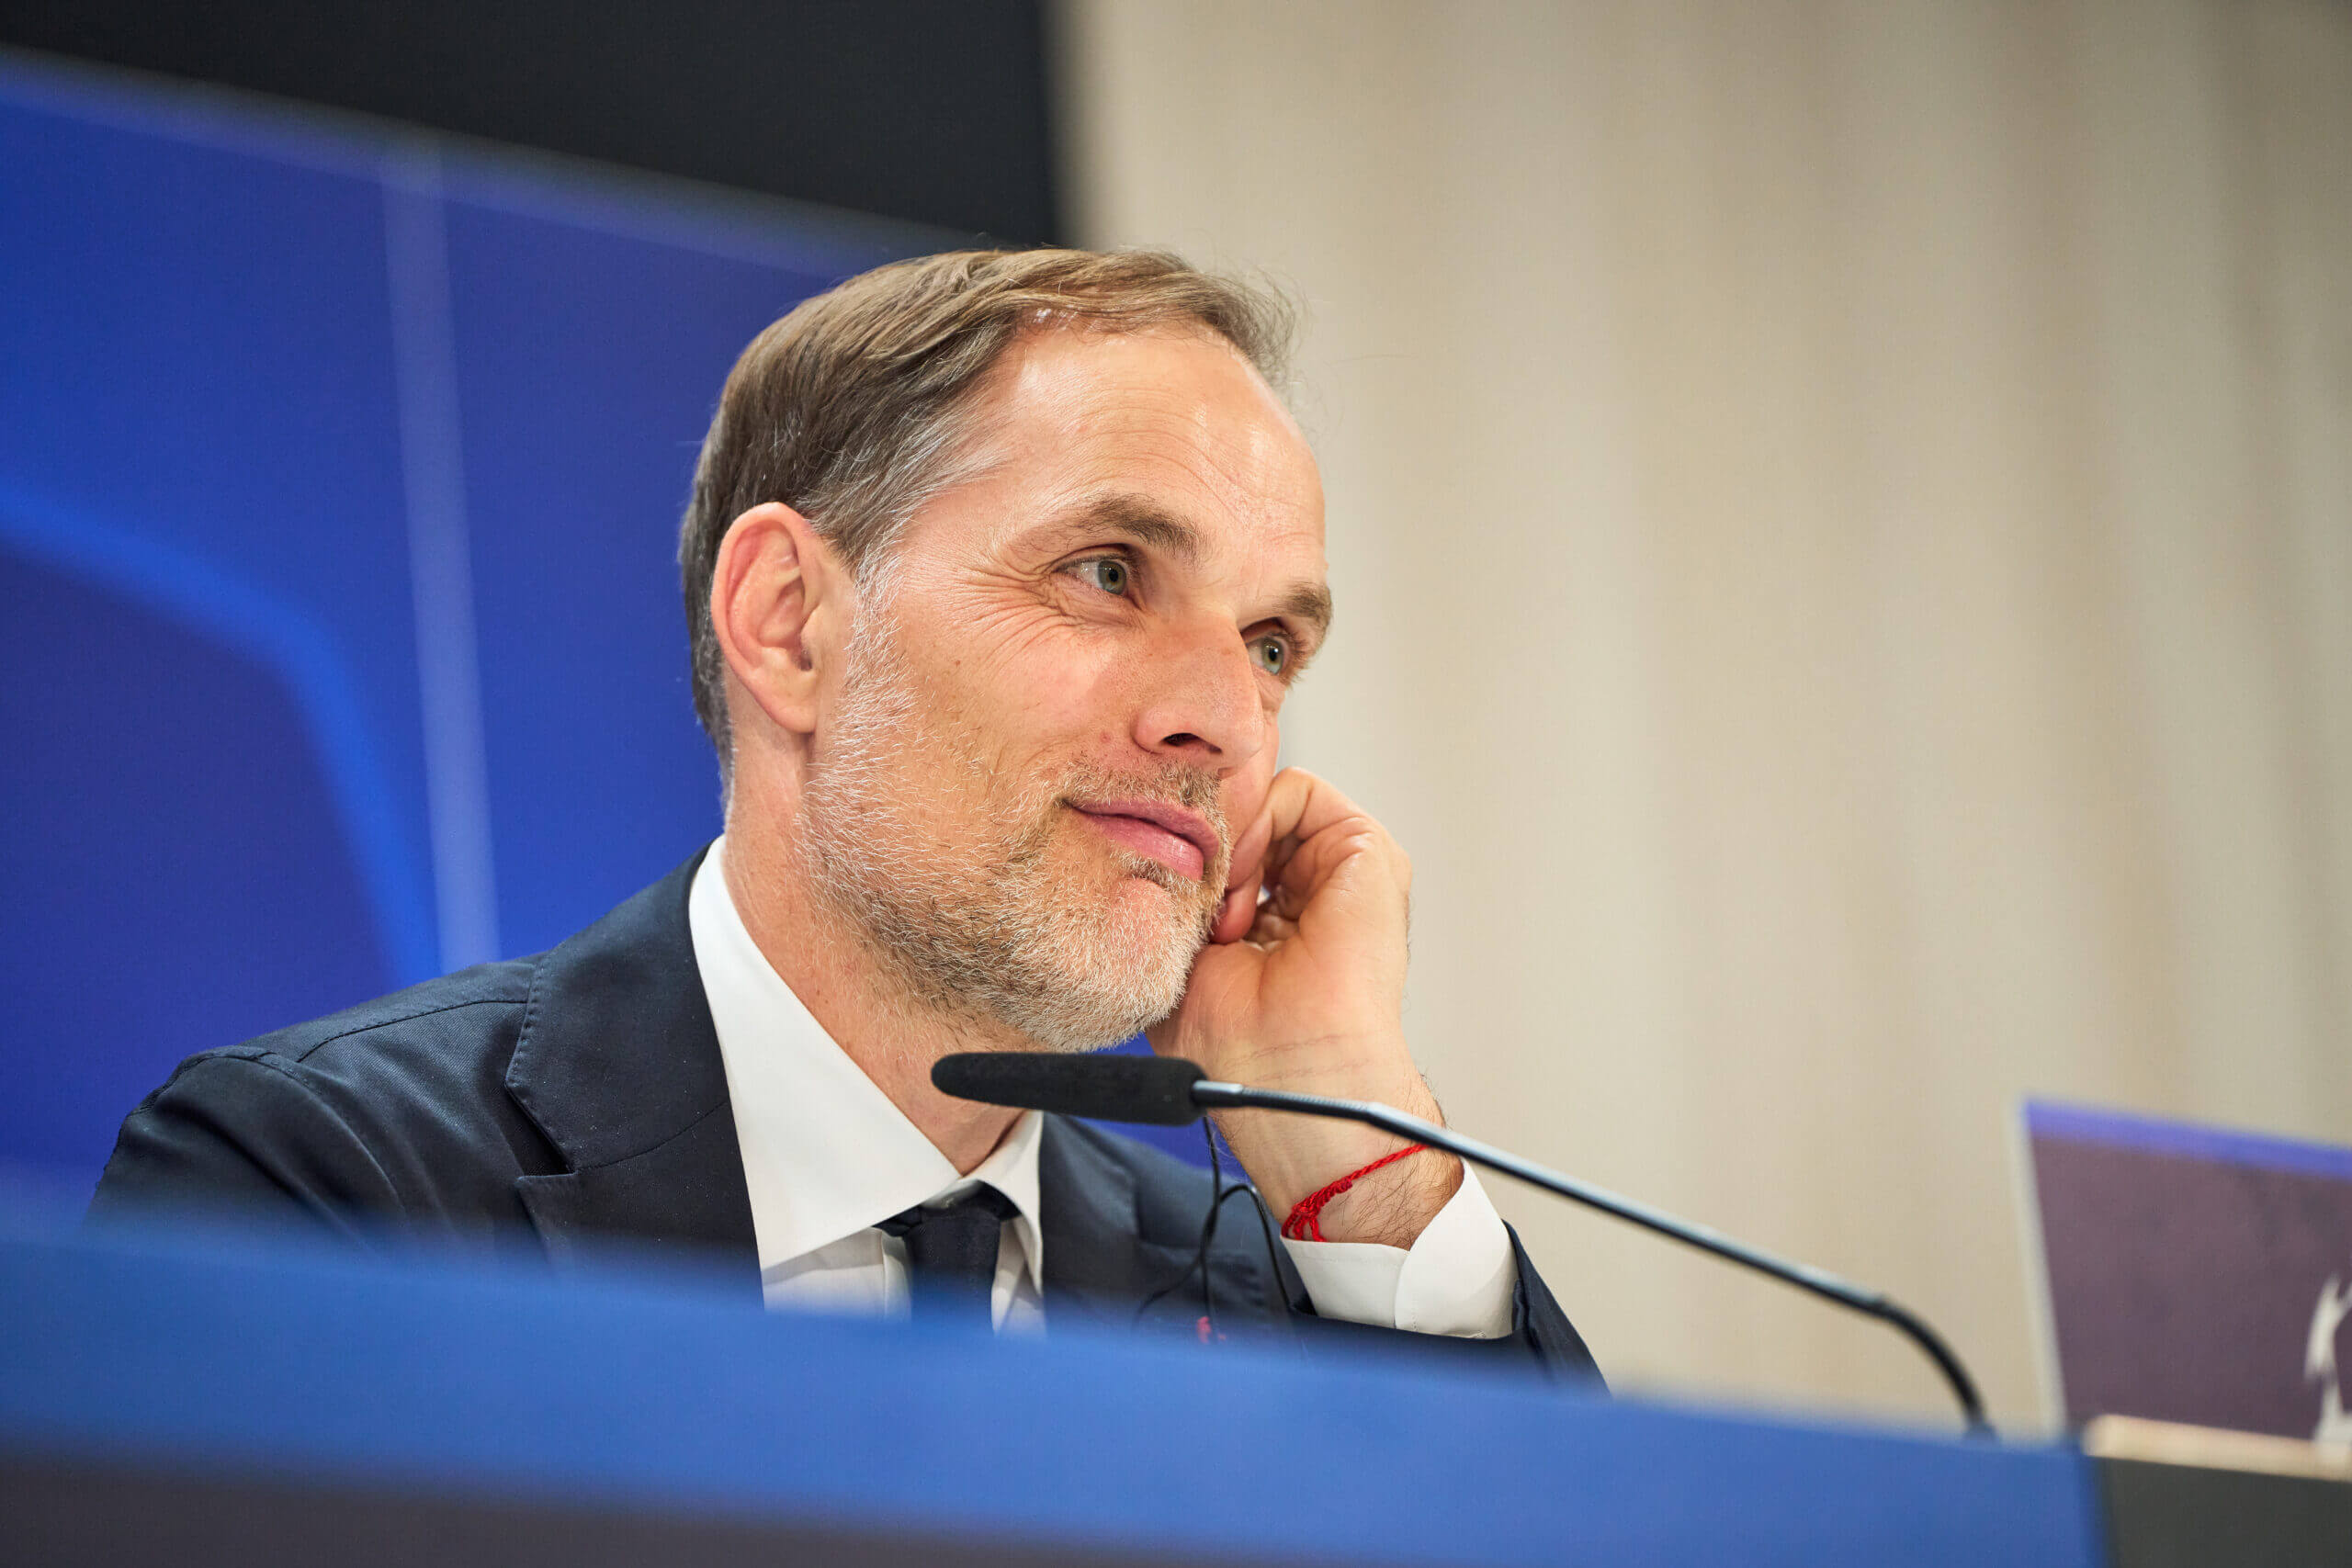 Thomas Tuchel discusses potential Premier League return ahead of Bayern Munich exit: ‘I loved it in England’